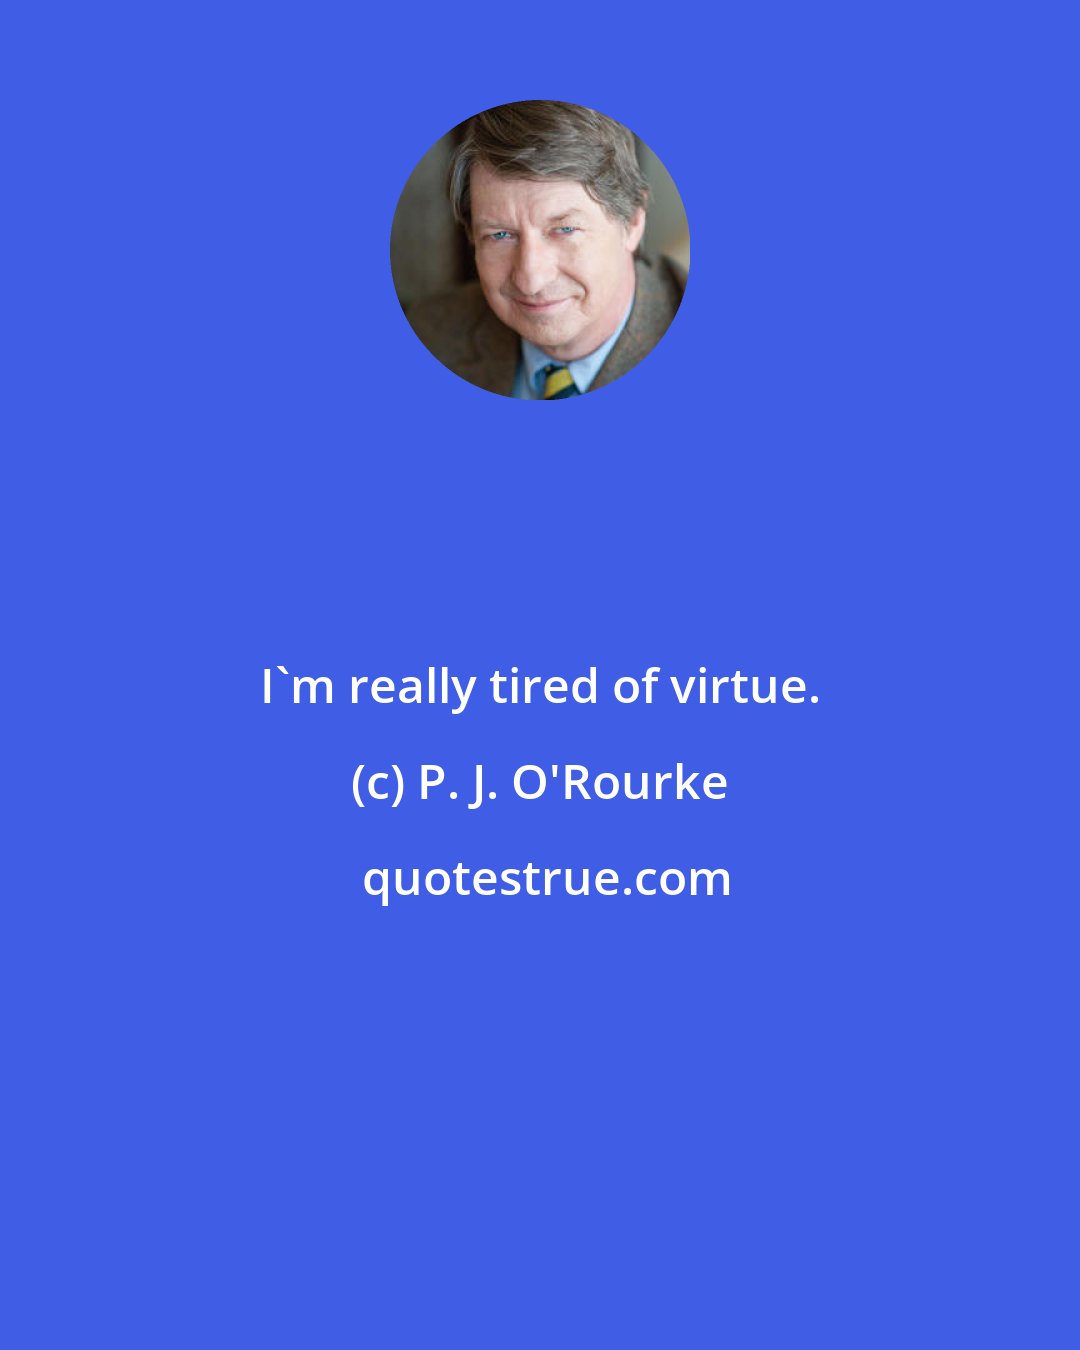 P. J. O'Rourke: I'm really tired of virtue.